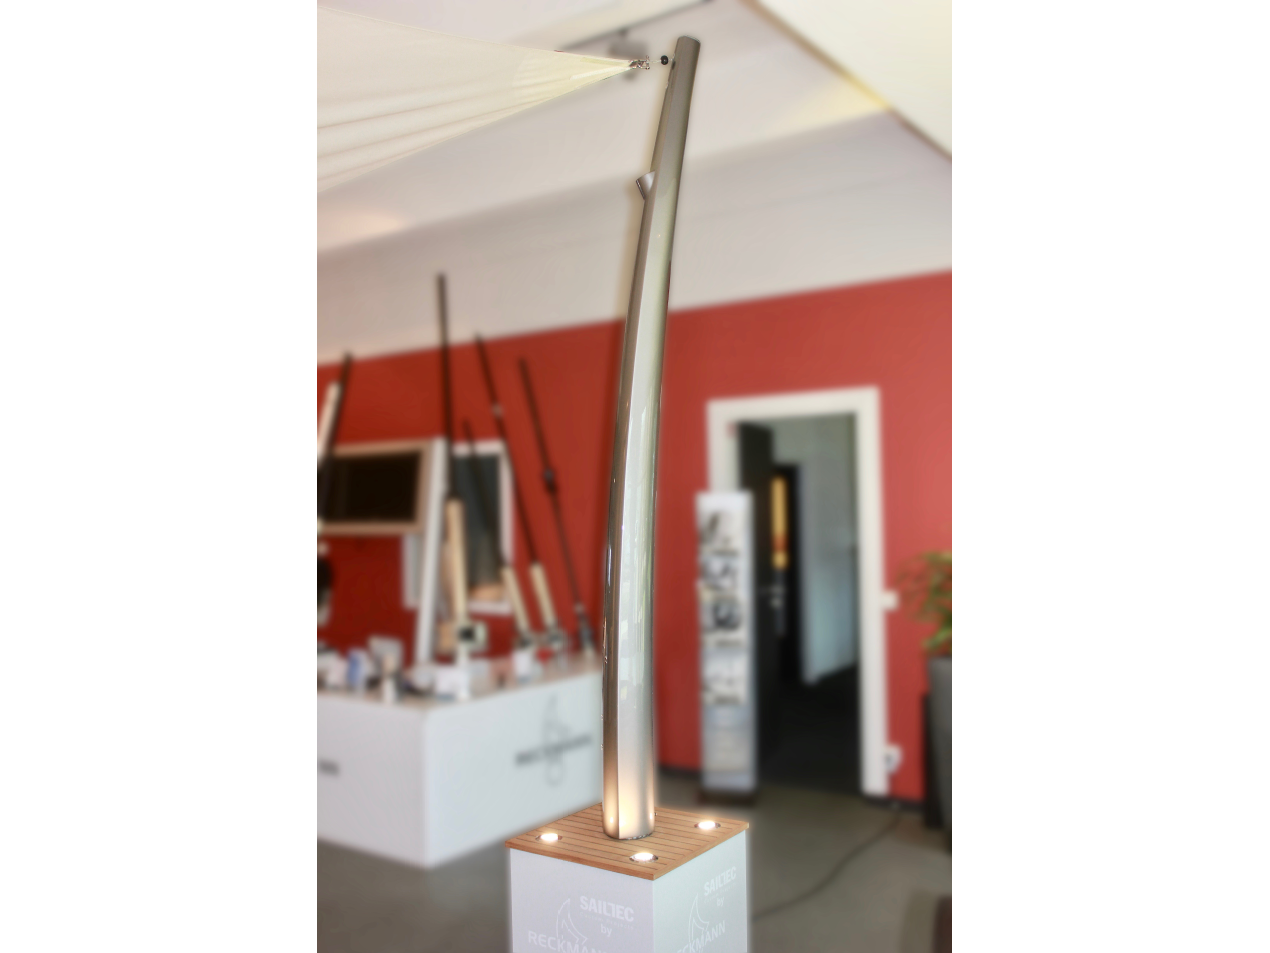 conical and curved sunFLIP poles with wireless induction technology by Studio F. A. Porsche and Sailtec Reckmann